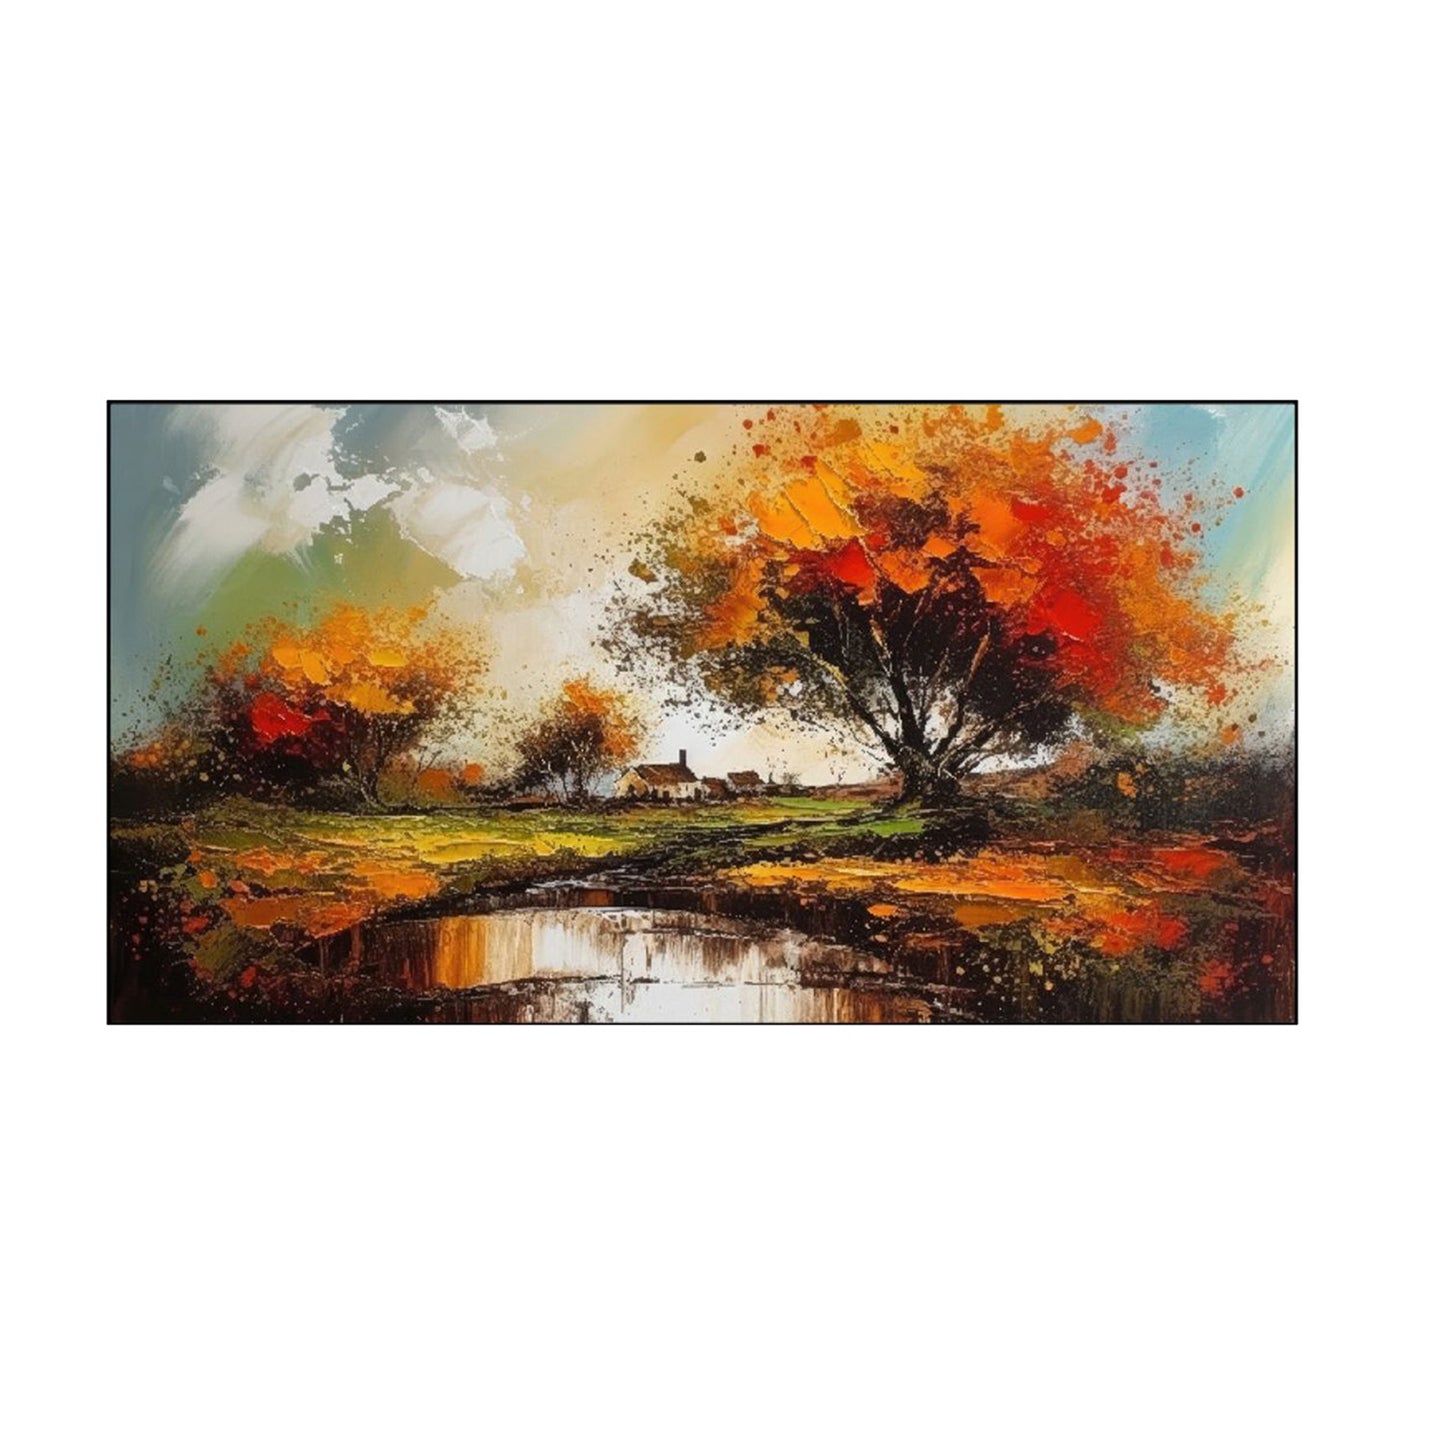 River Serenity: Lush Forest Reflections Wall Painting